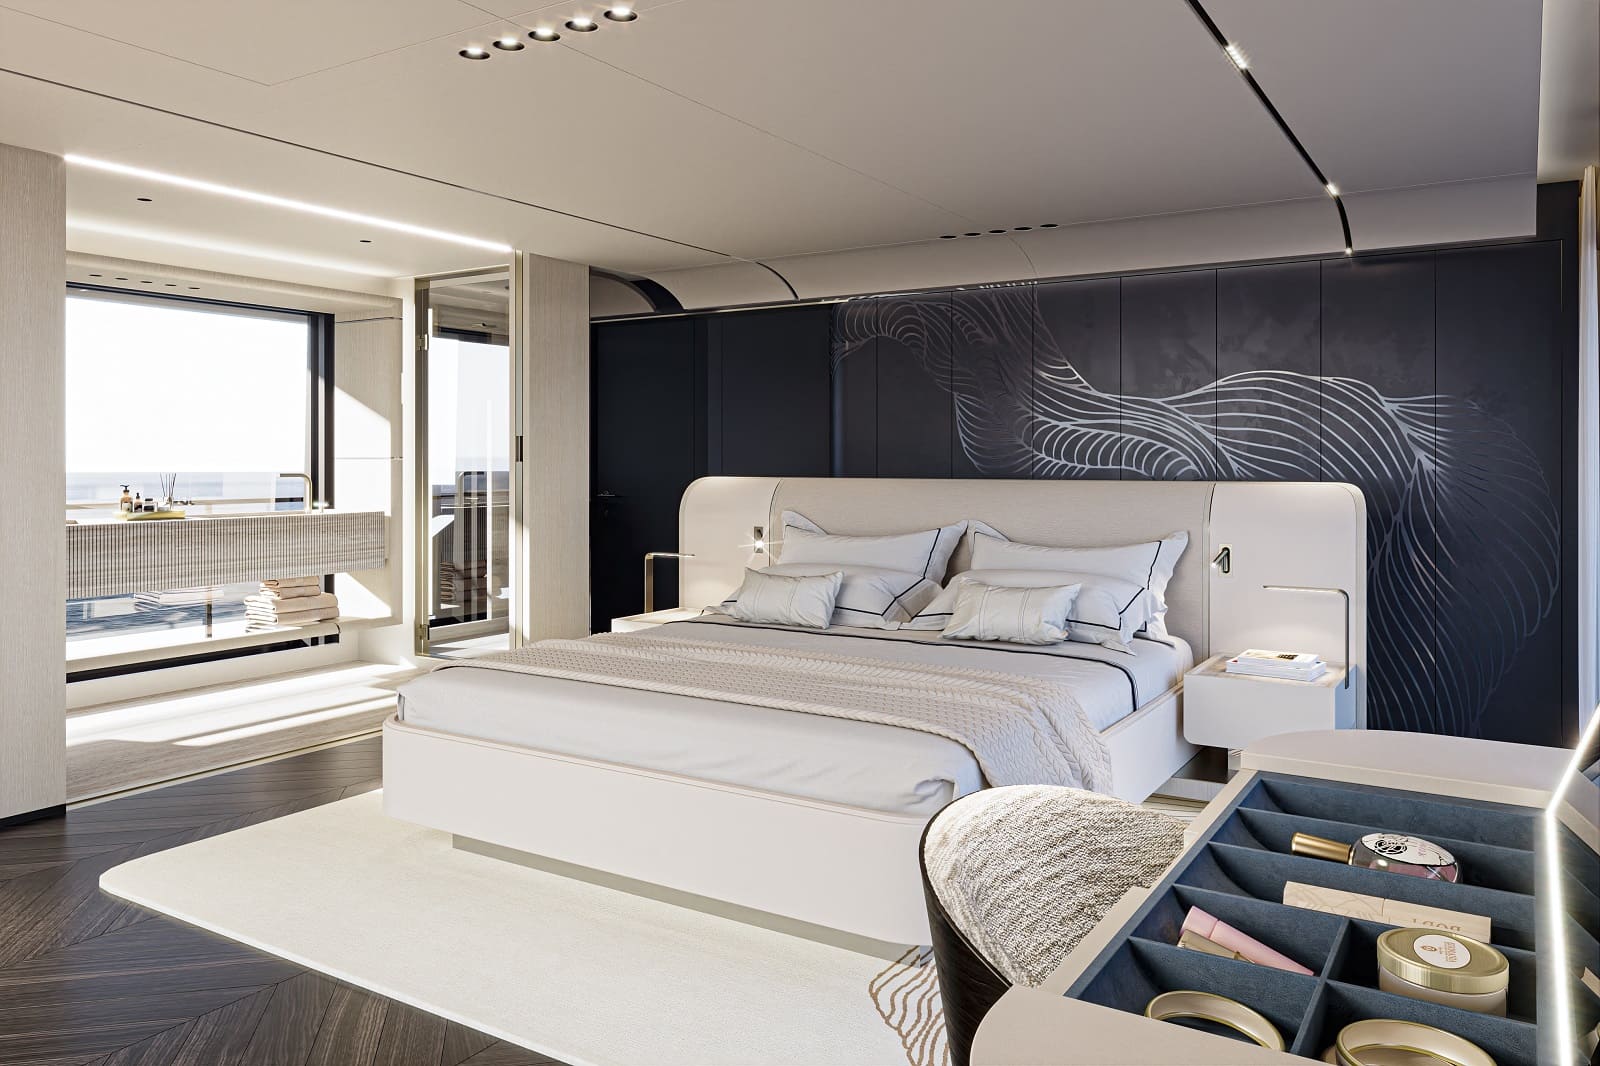 B120 Explorer superyacht: A Stunning Collaboration by Phathom Studio and Bering Yachts